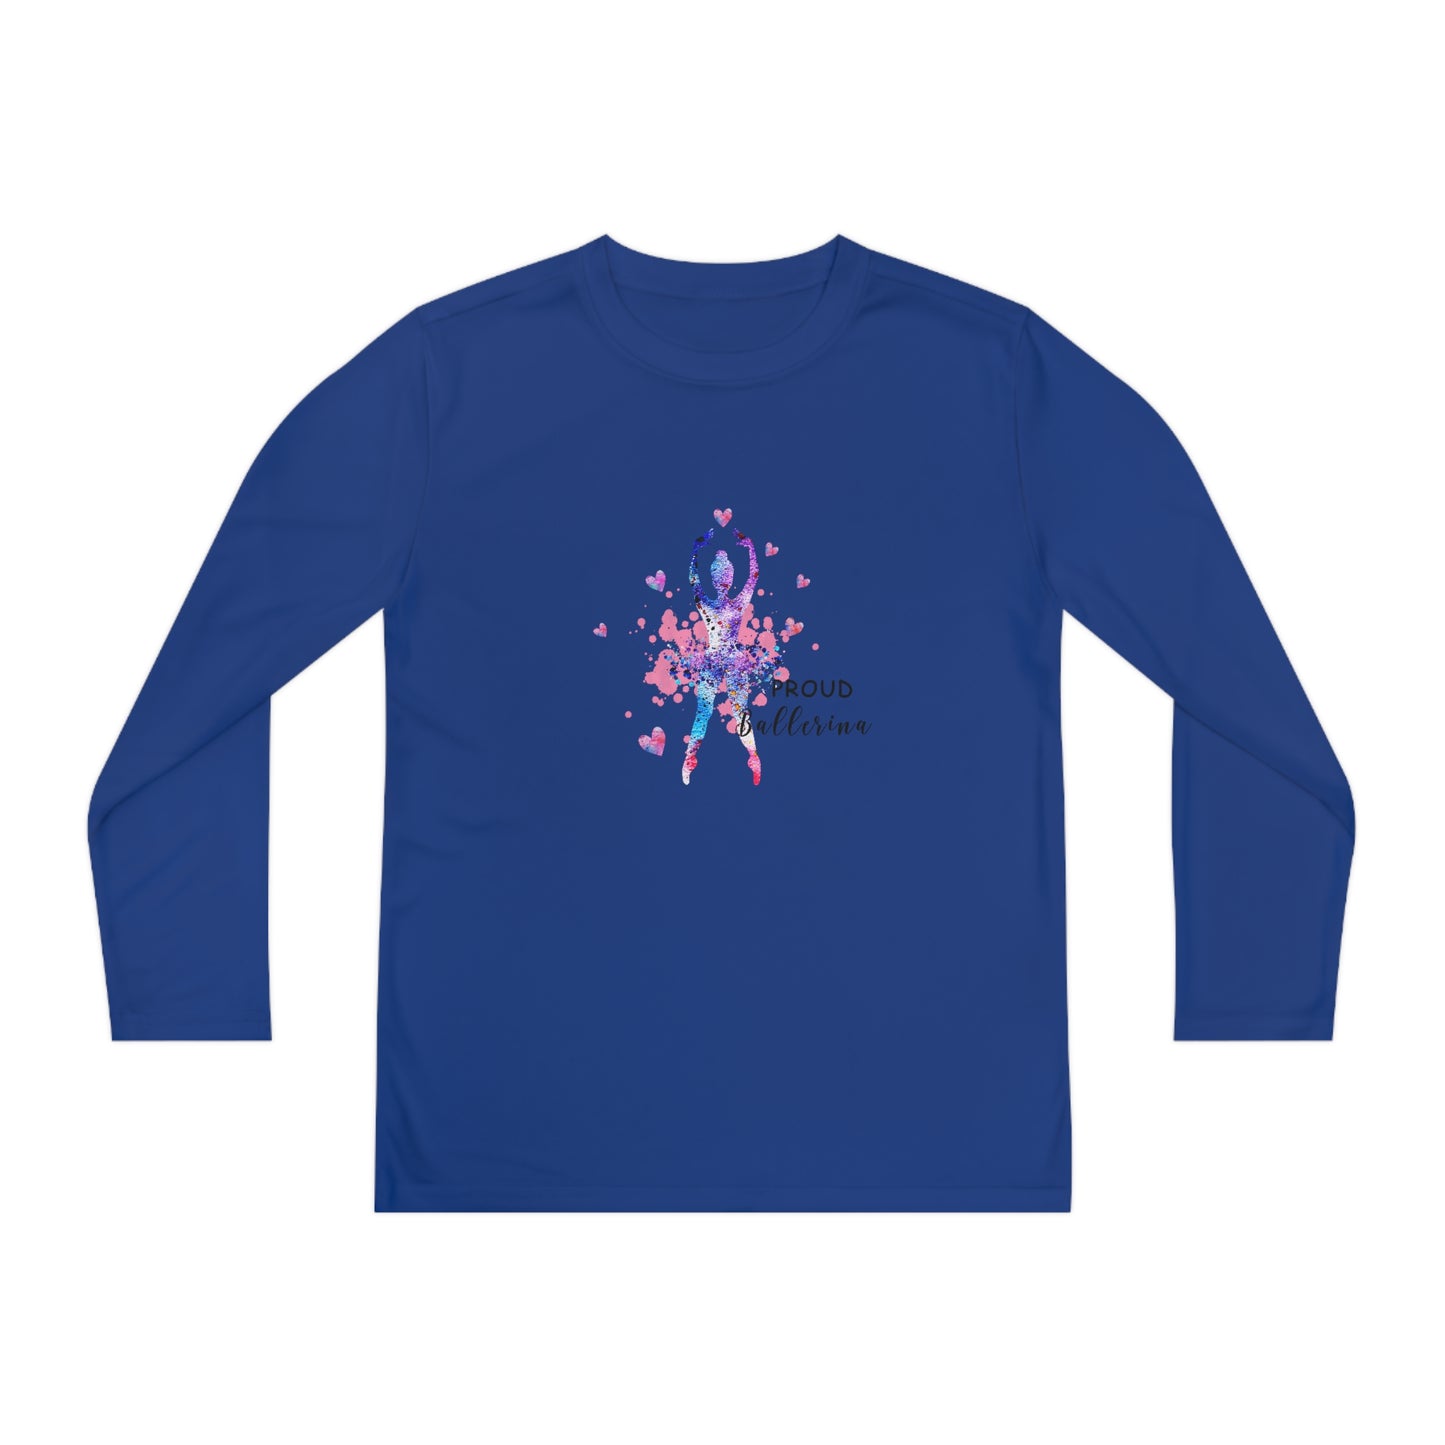 Proud Ballerina/AIB Logo- Double Sided Youth LS